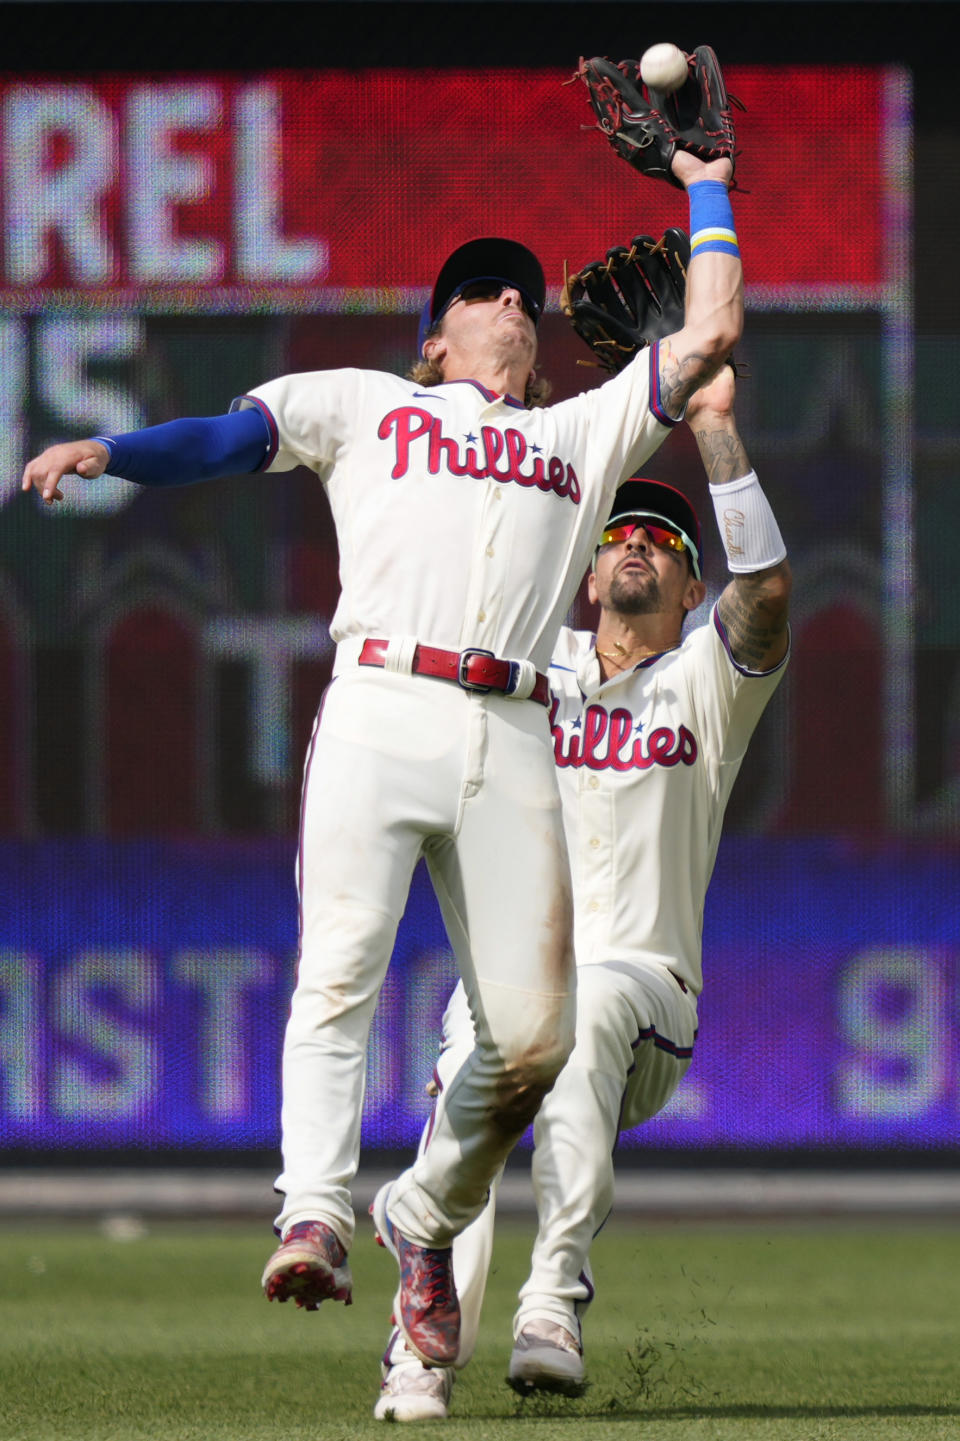 Philadelphia Phillies second baseman Bryson Stott, left, and right fielder Nick Castellanos collide as Stott catches a fly out by San Diego Padres' Manny Machado during the ninth inning of the first baseball game in a doubleheader, Saturday, July 15, 2023, in Philadelphia. (AP Photo/Matt Slocum)